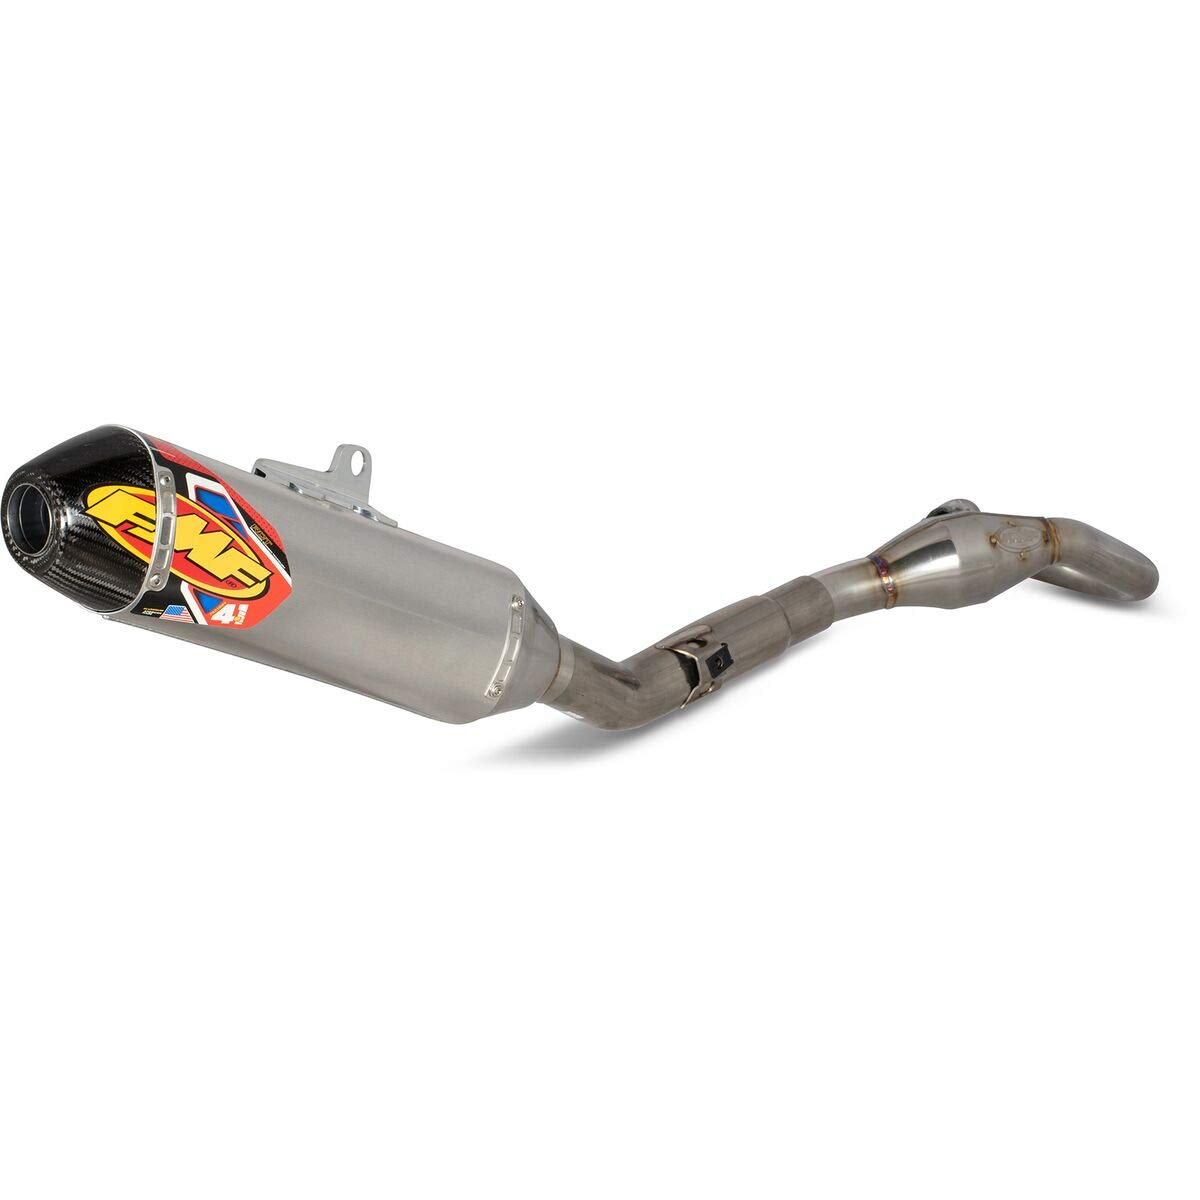 HON CRF450R'21 S/S ALUM FACT-4.1 RCT W/C-F END CAP CMPLT EXHAUST SYSTM W/SS MGBMB HDR von FMF Racing